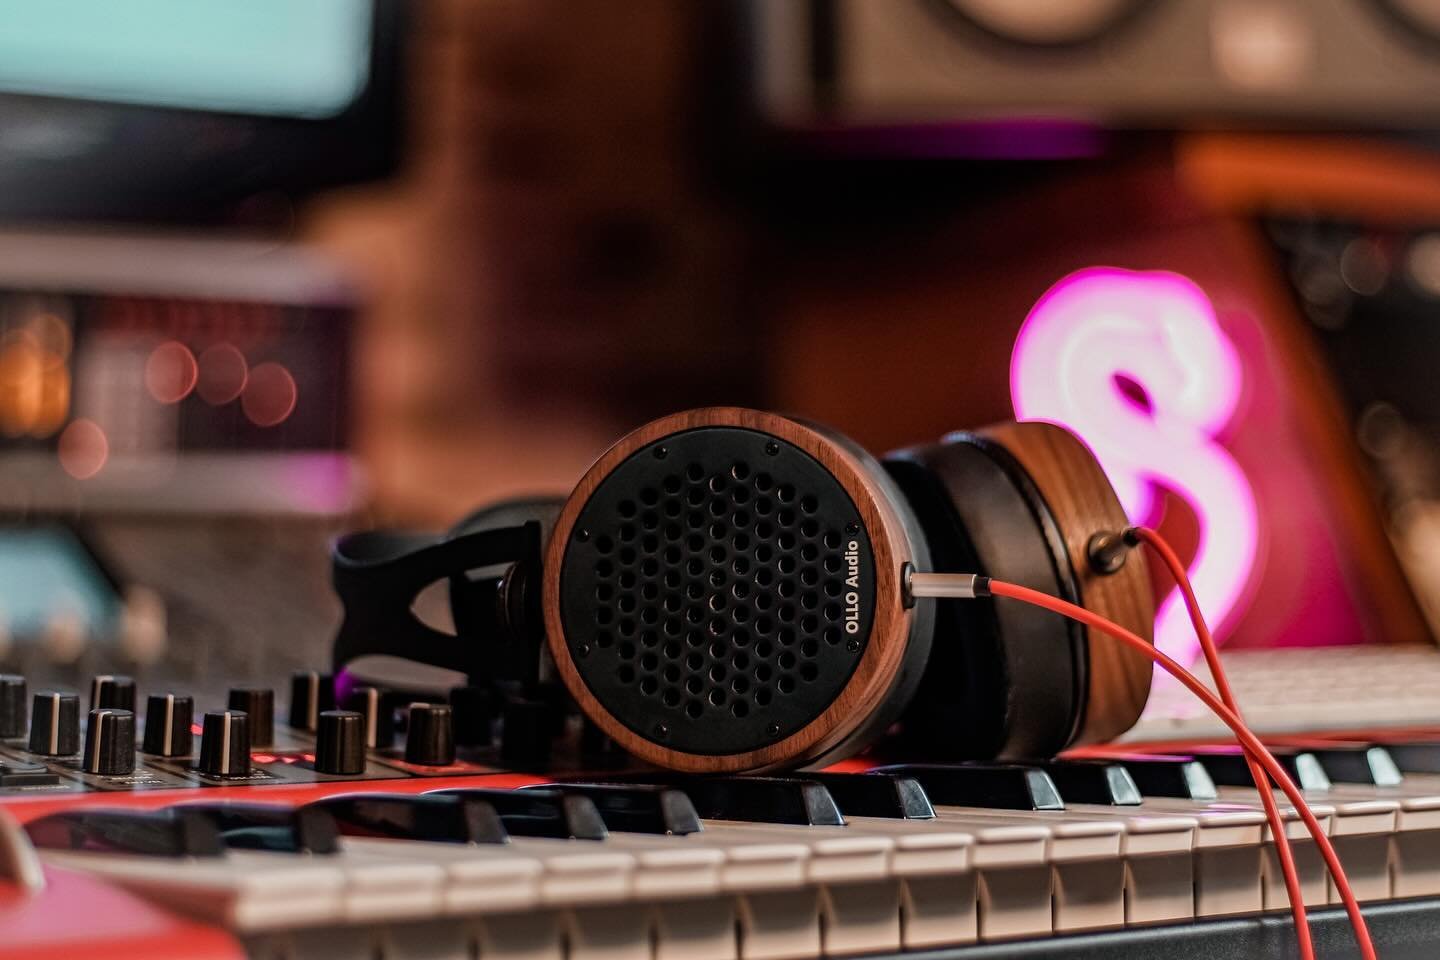 It&rsquo;s #TeachMeThursday time!&nbsp;🤘
&nbsp;
💡Did you know that every* new @olloaudio headphone includes an individual calibration file and a free plugin called USC-1?
&nbsp;
OLLO headphones are acoustically flat within ~2dB tolerance from the t